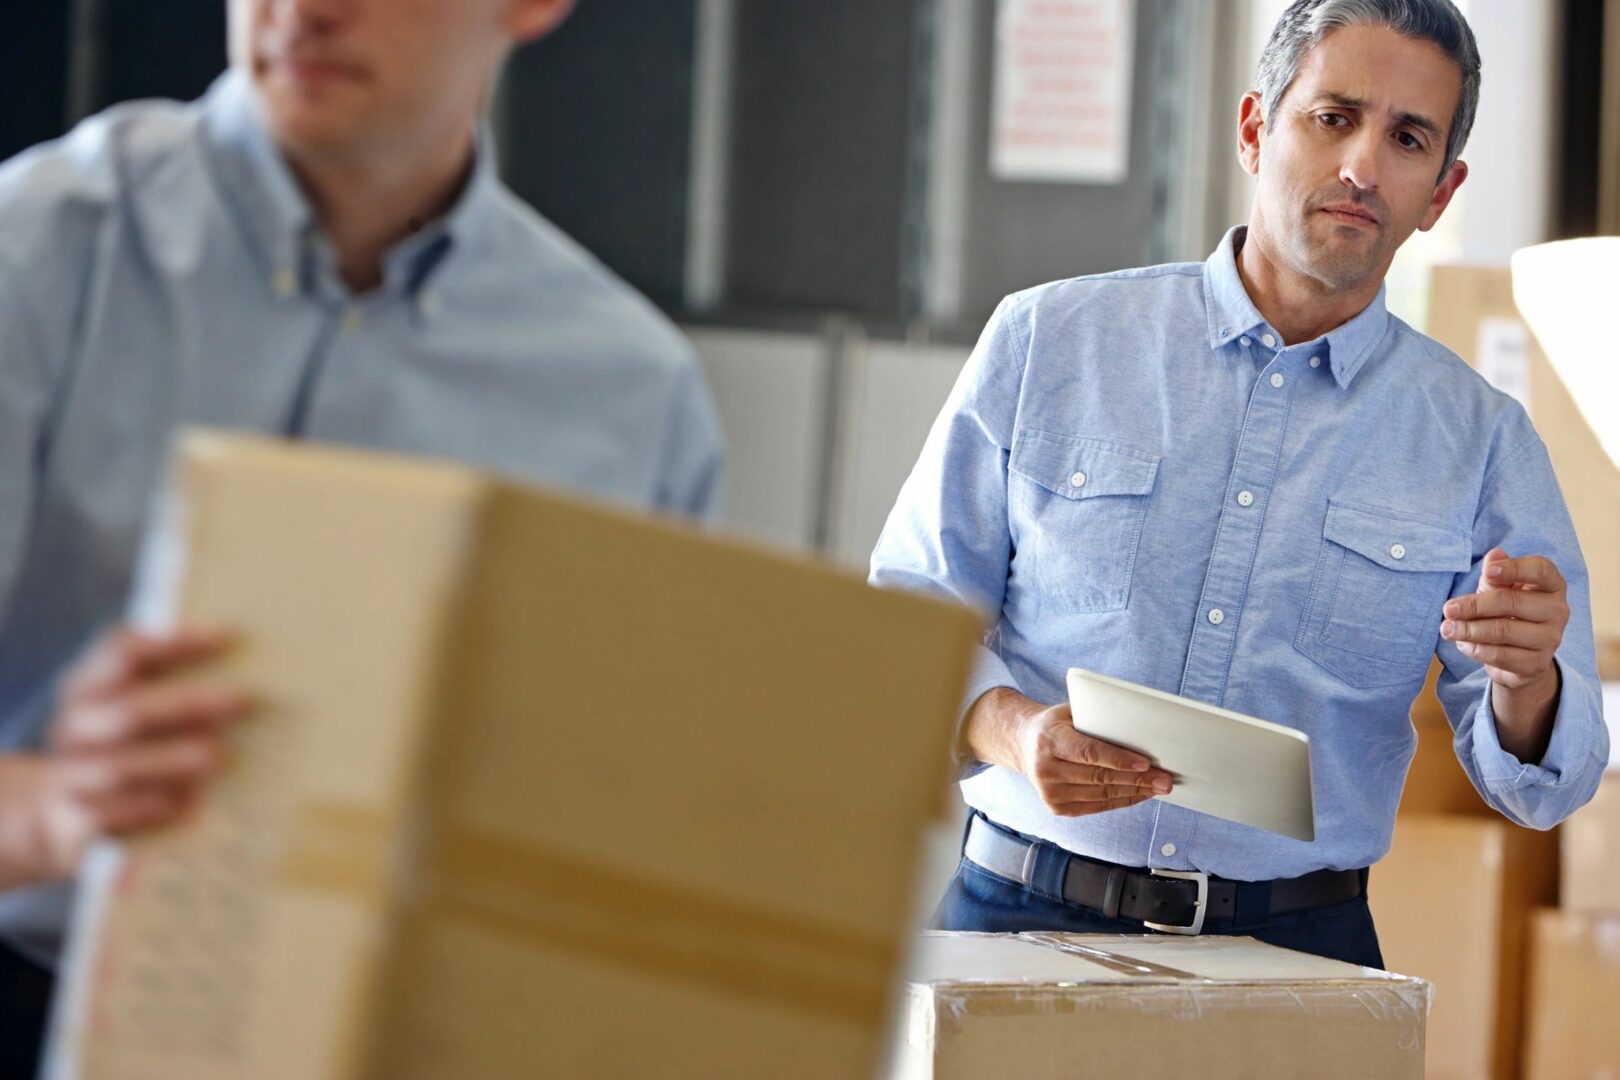 A logistics person double-checking a delivery